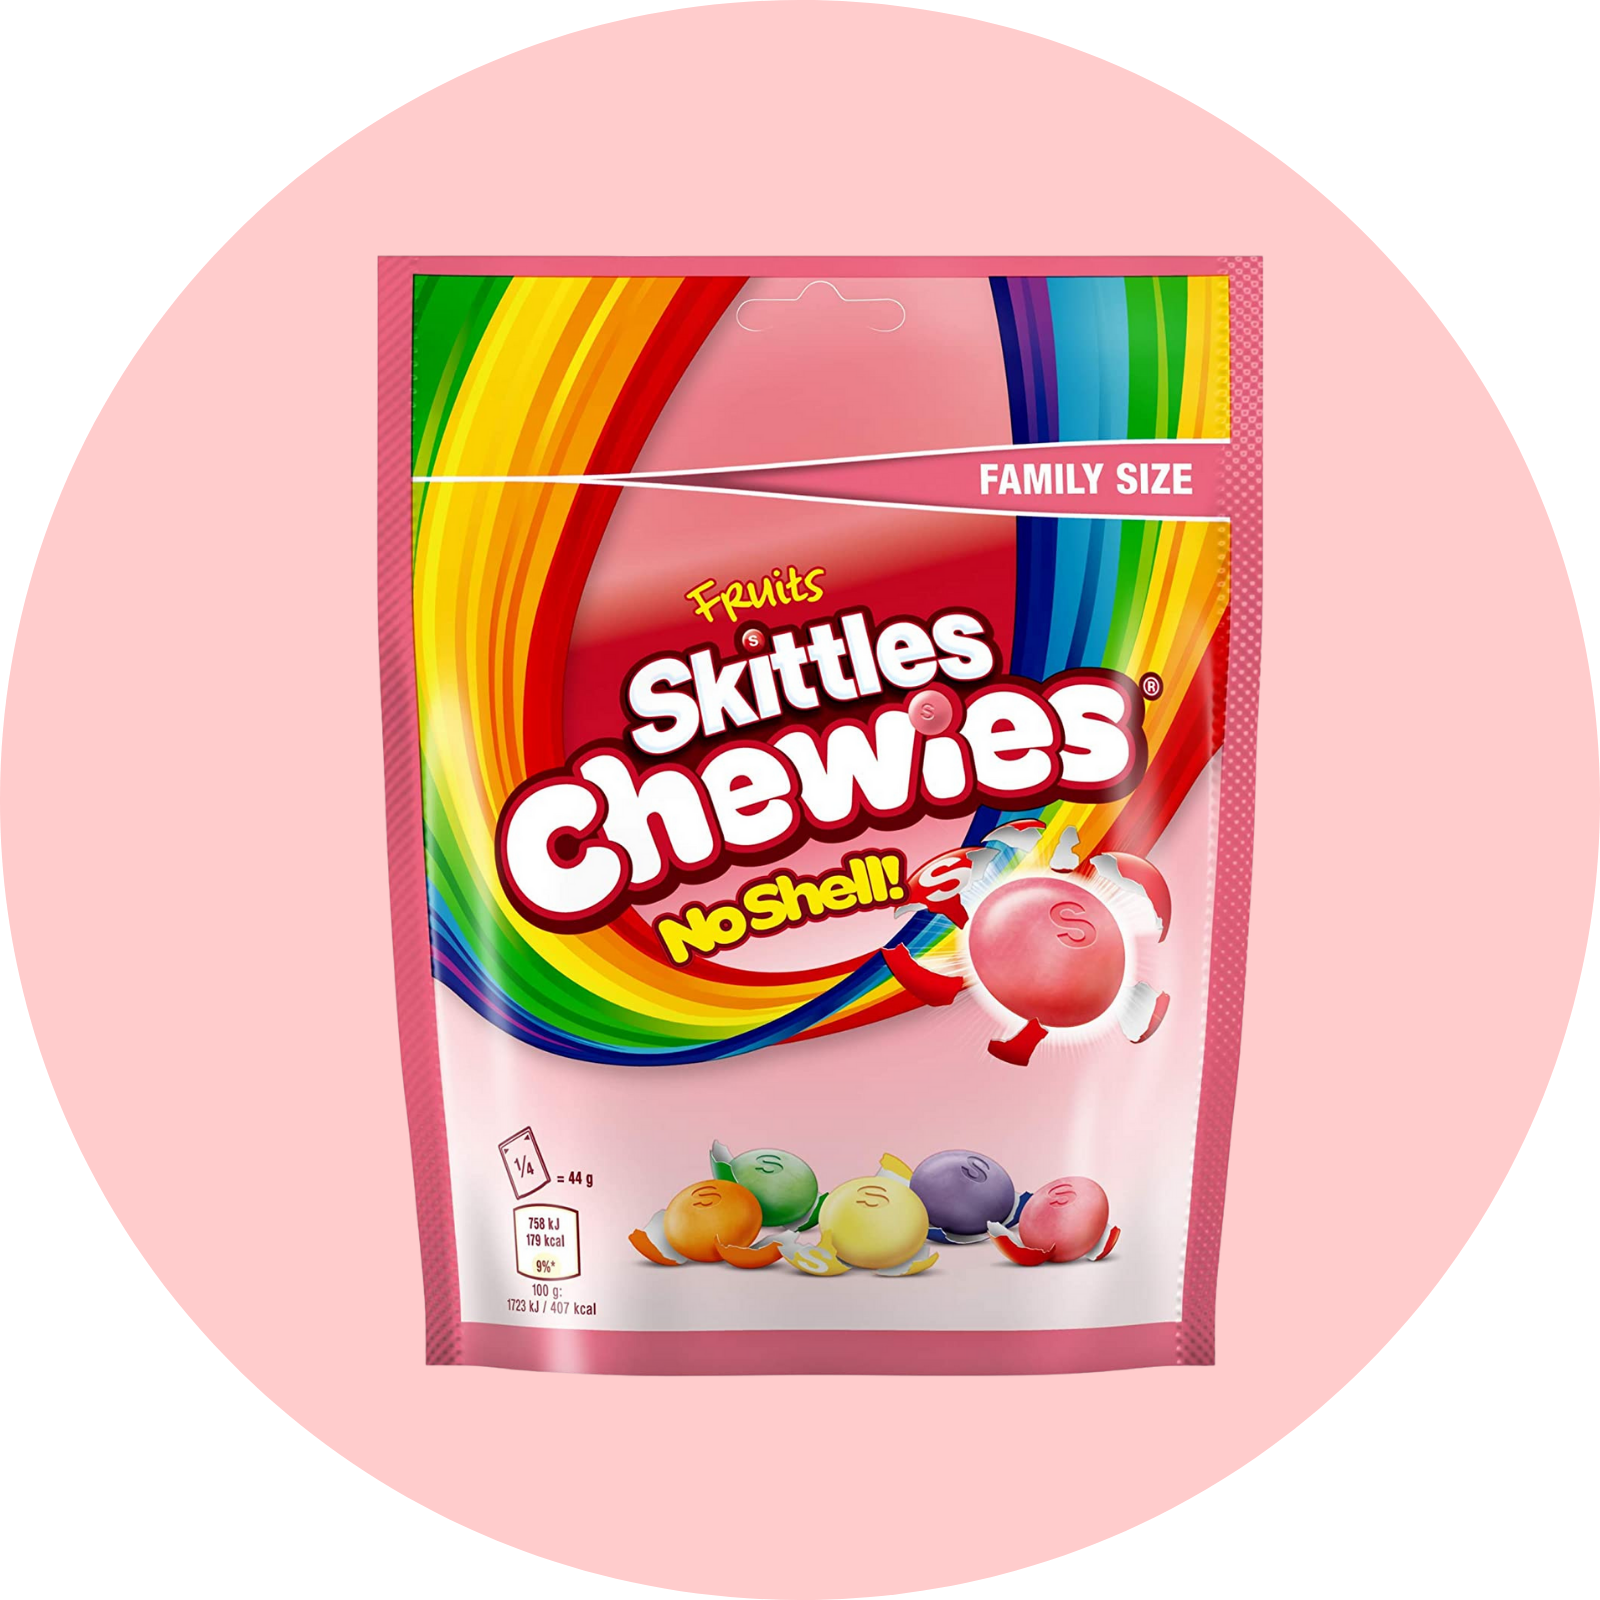 Skittles Chewies Pouch